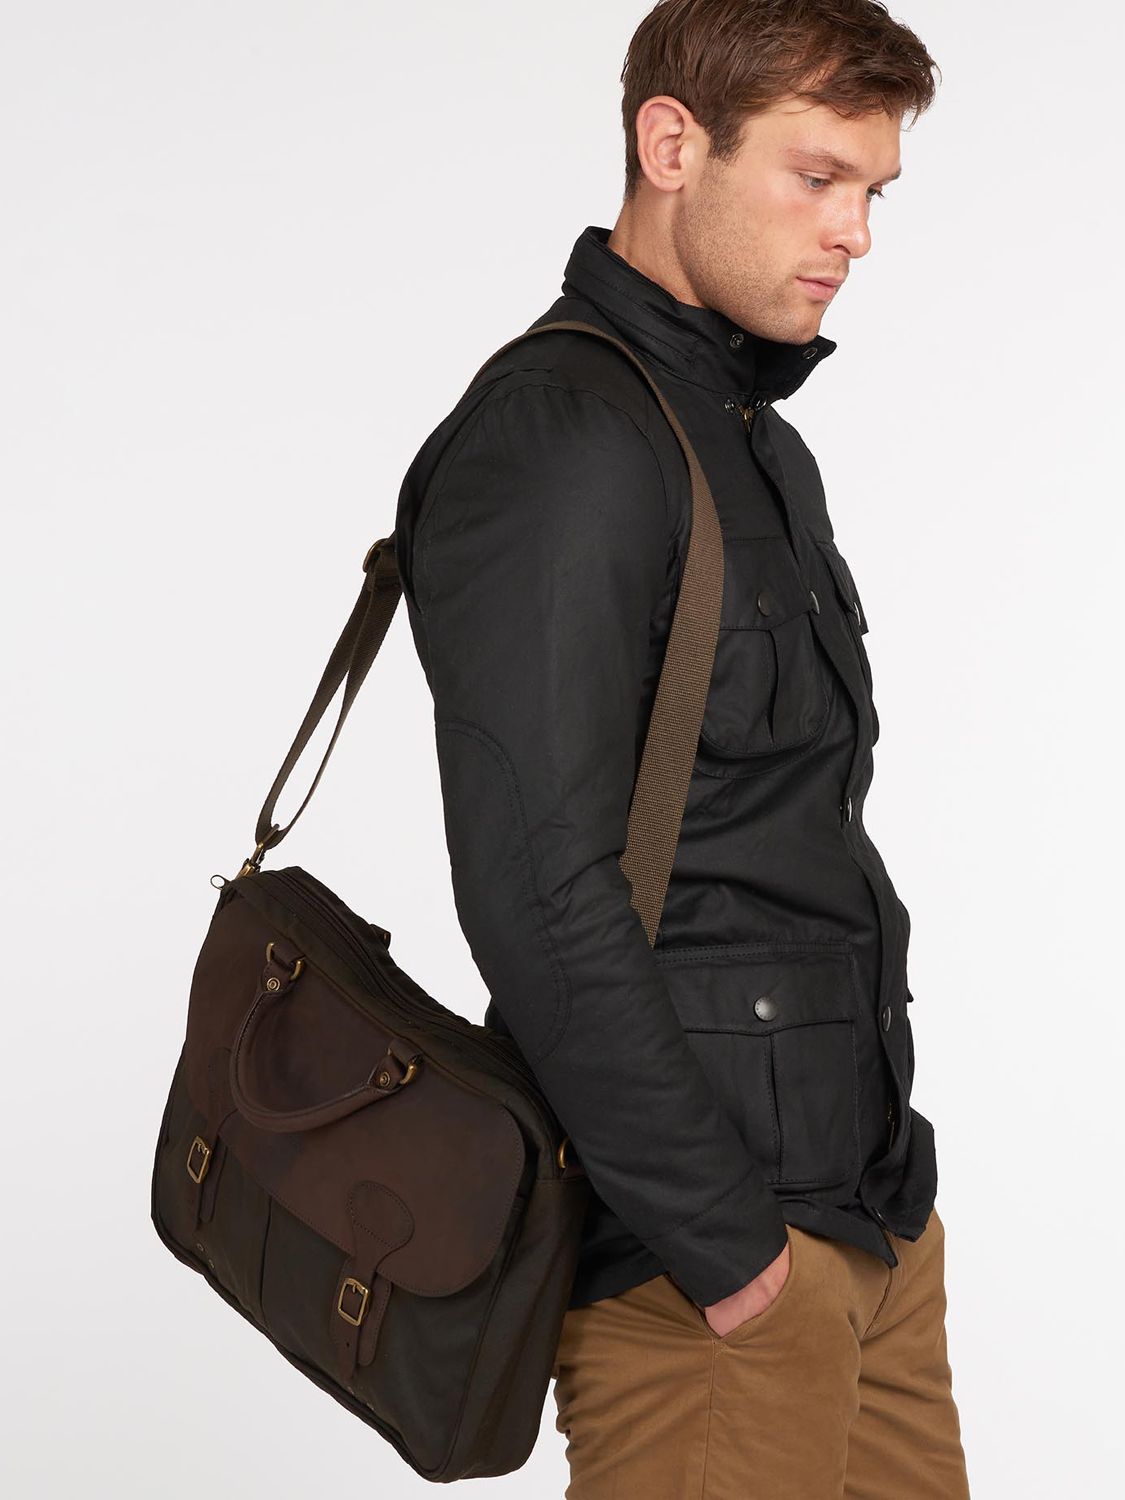 Barbour Wax Cotton and Leather Trim Satchel, Olive at John Lewis & Partners